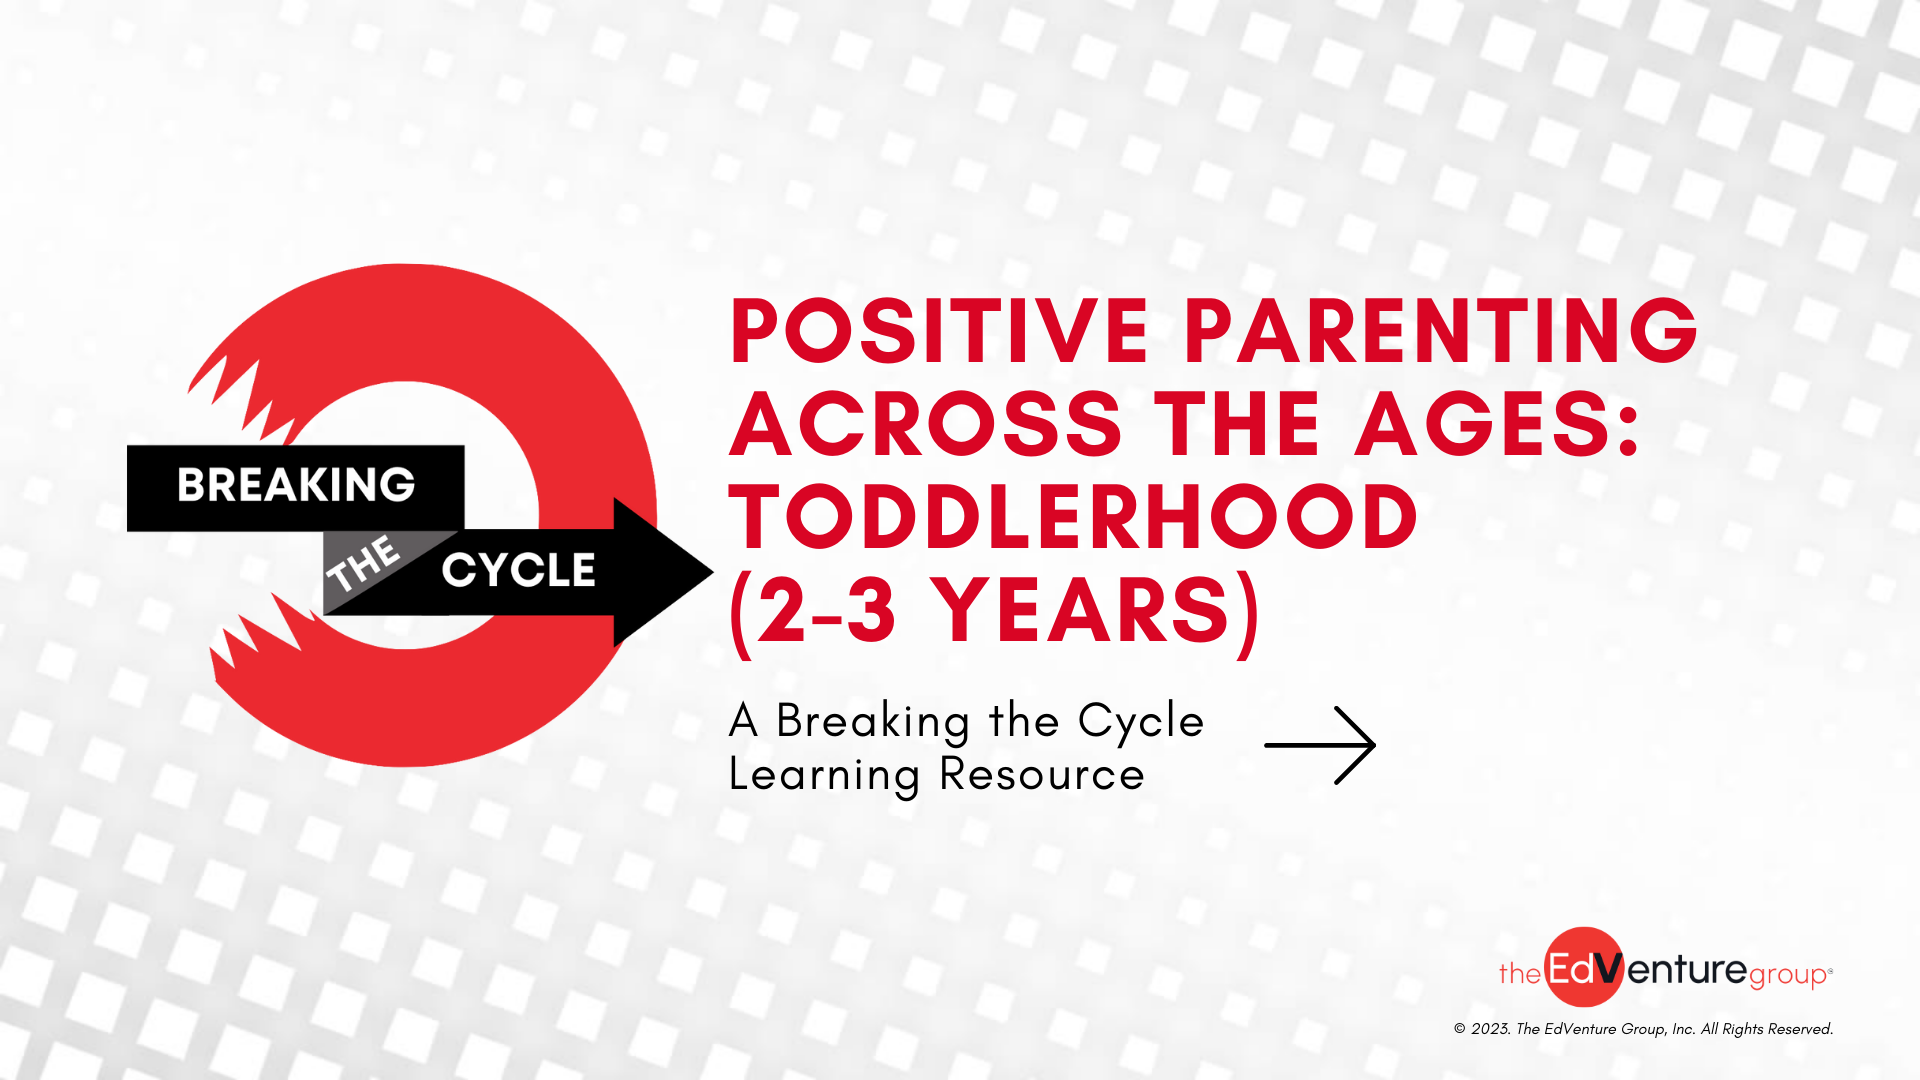 Toddlerhood (2-3 years) Positive Parenting Across the Ages